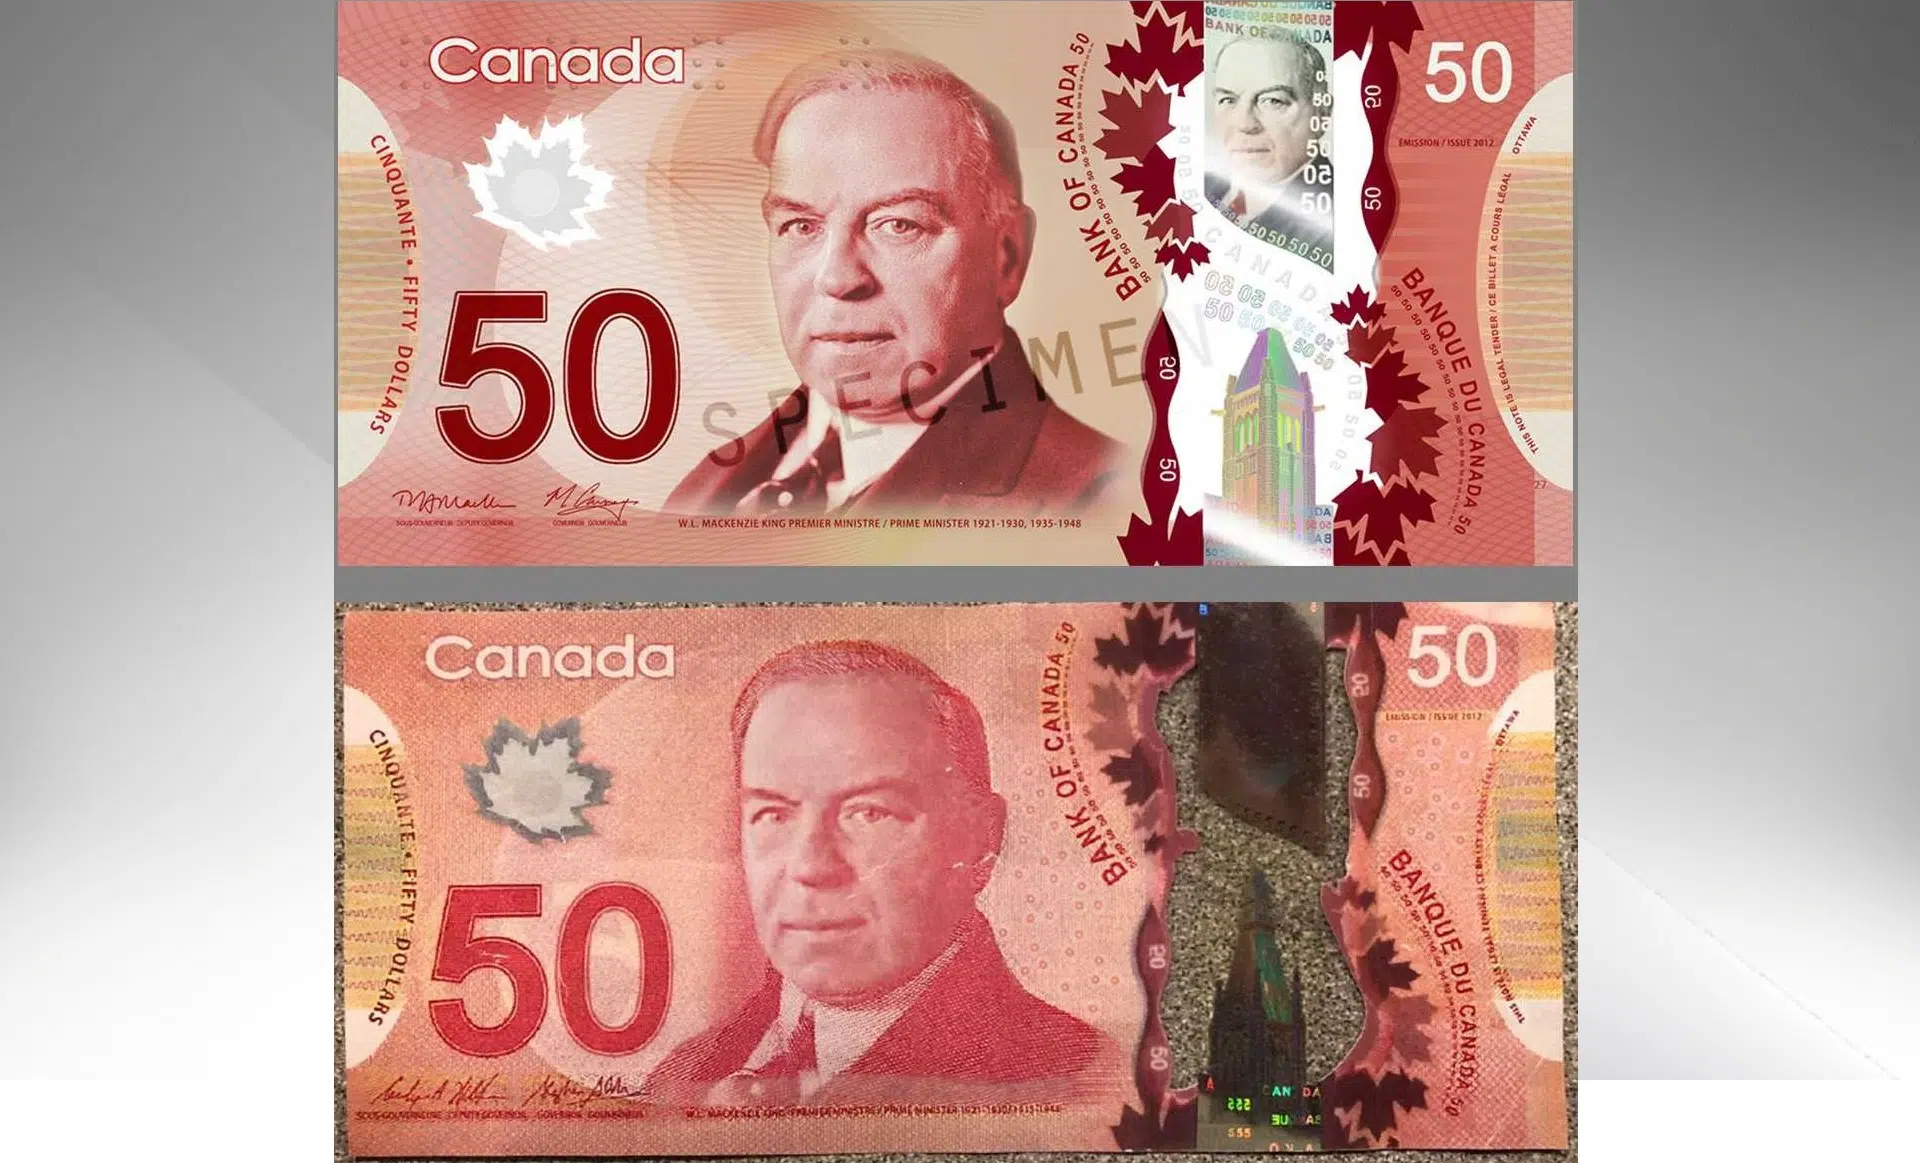 Businesses And Consumers Cautioned About 50 Counterfeit Bills Showing Up Lethbridge News Now